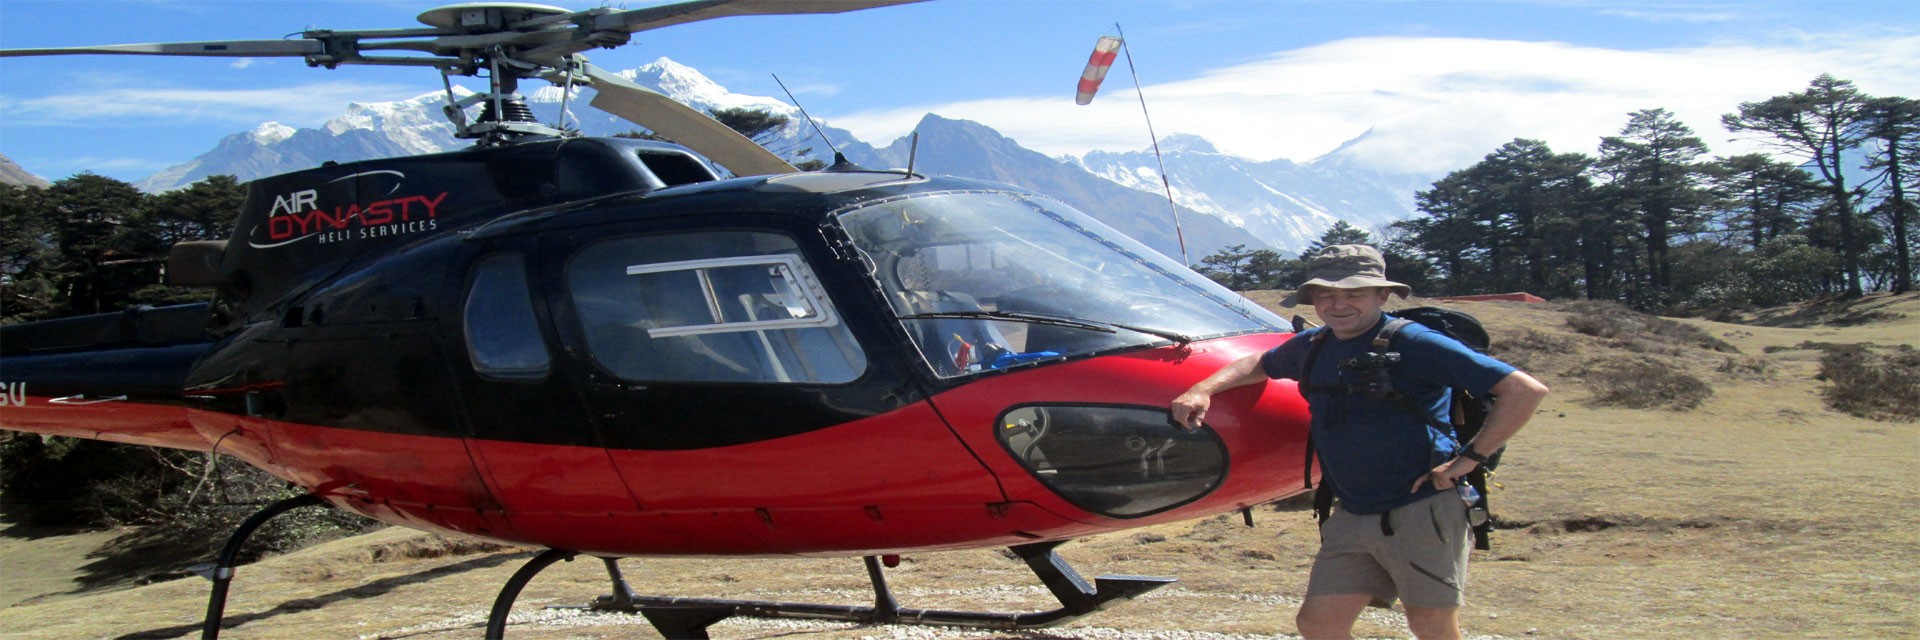 How to Avoid Helicopter Rescue Scams in Nepal